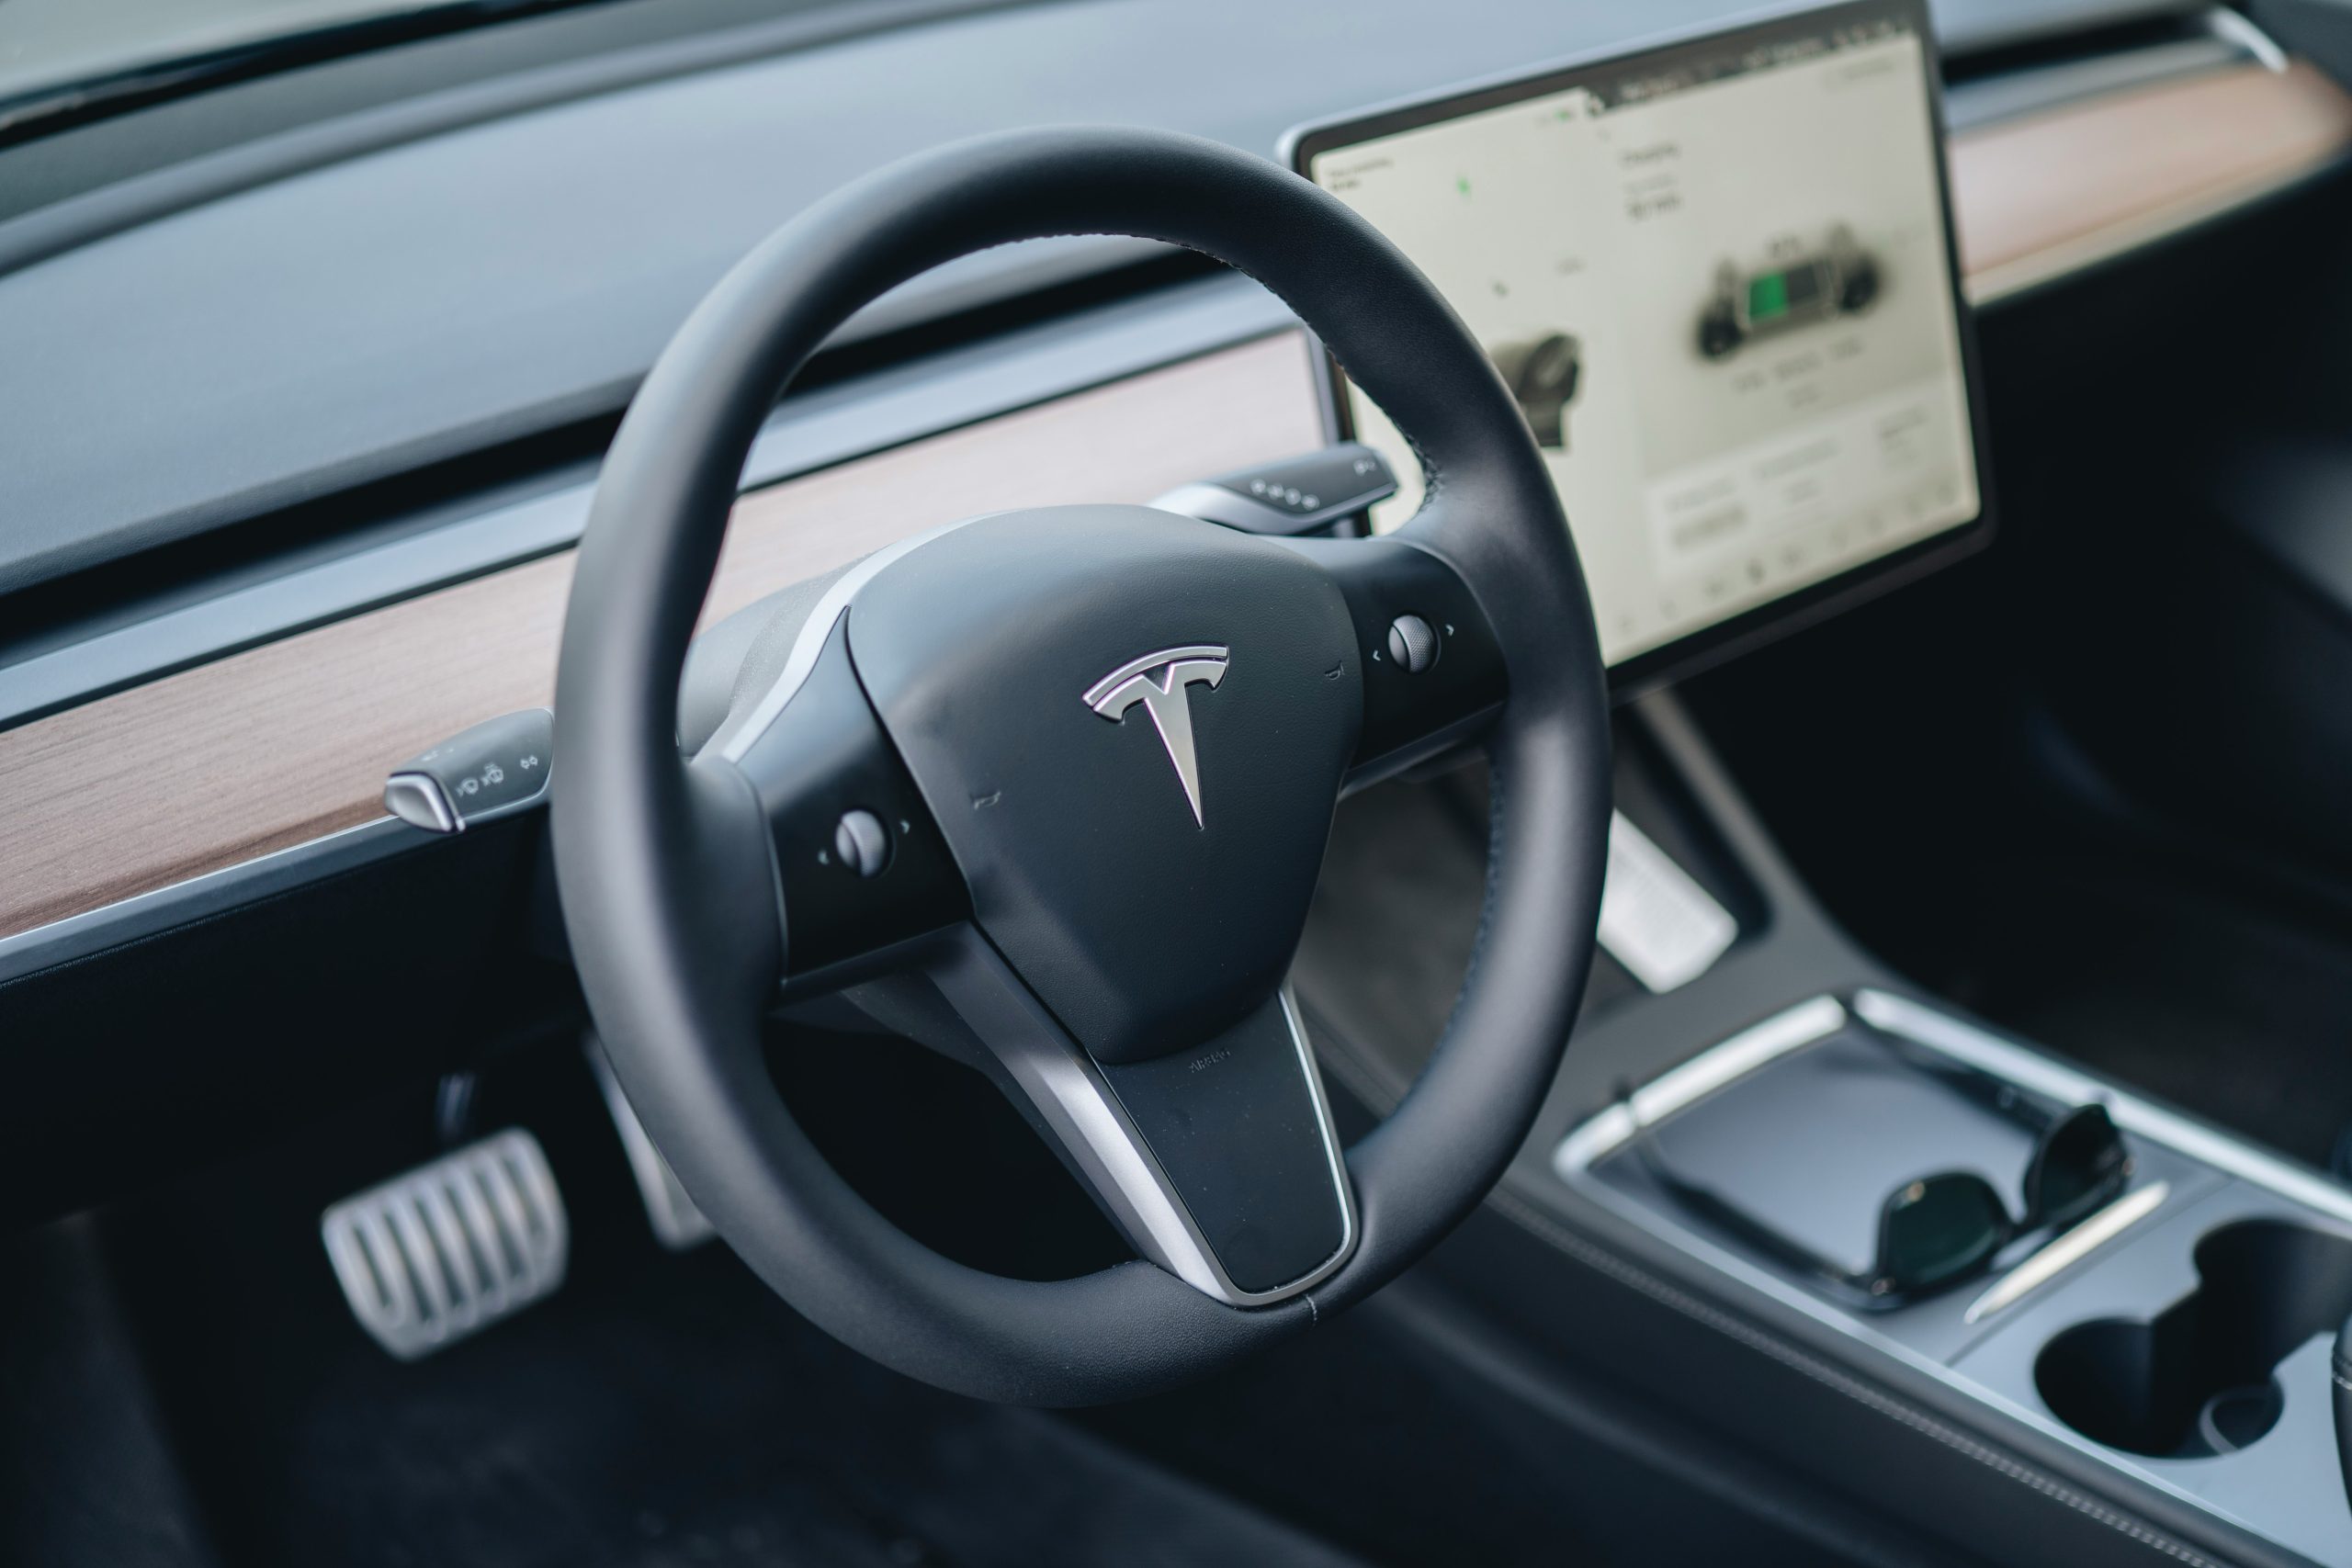 Interior of a Tesla, Showing the Steering Wheel, Centre Console, Dashboard, and Touchscreen